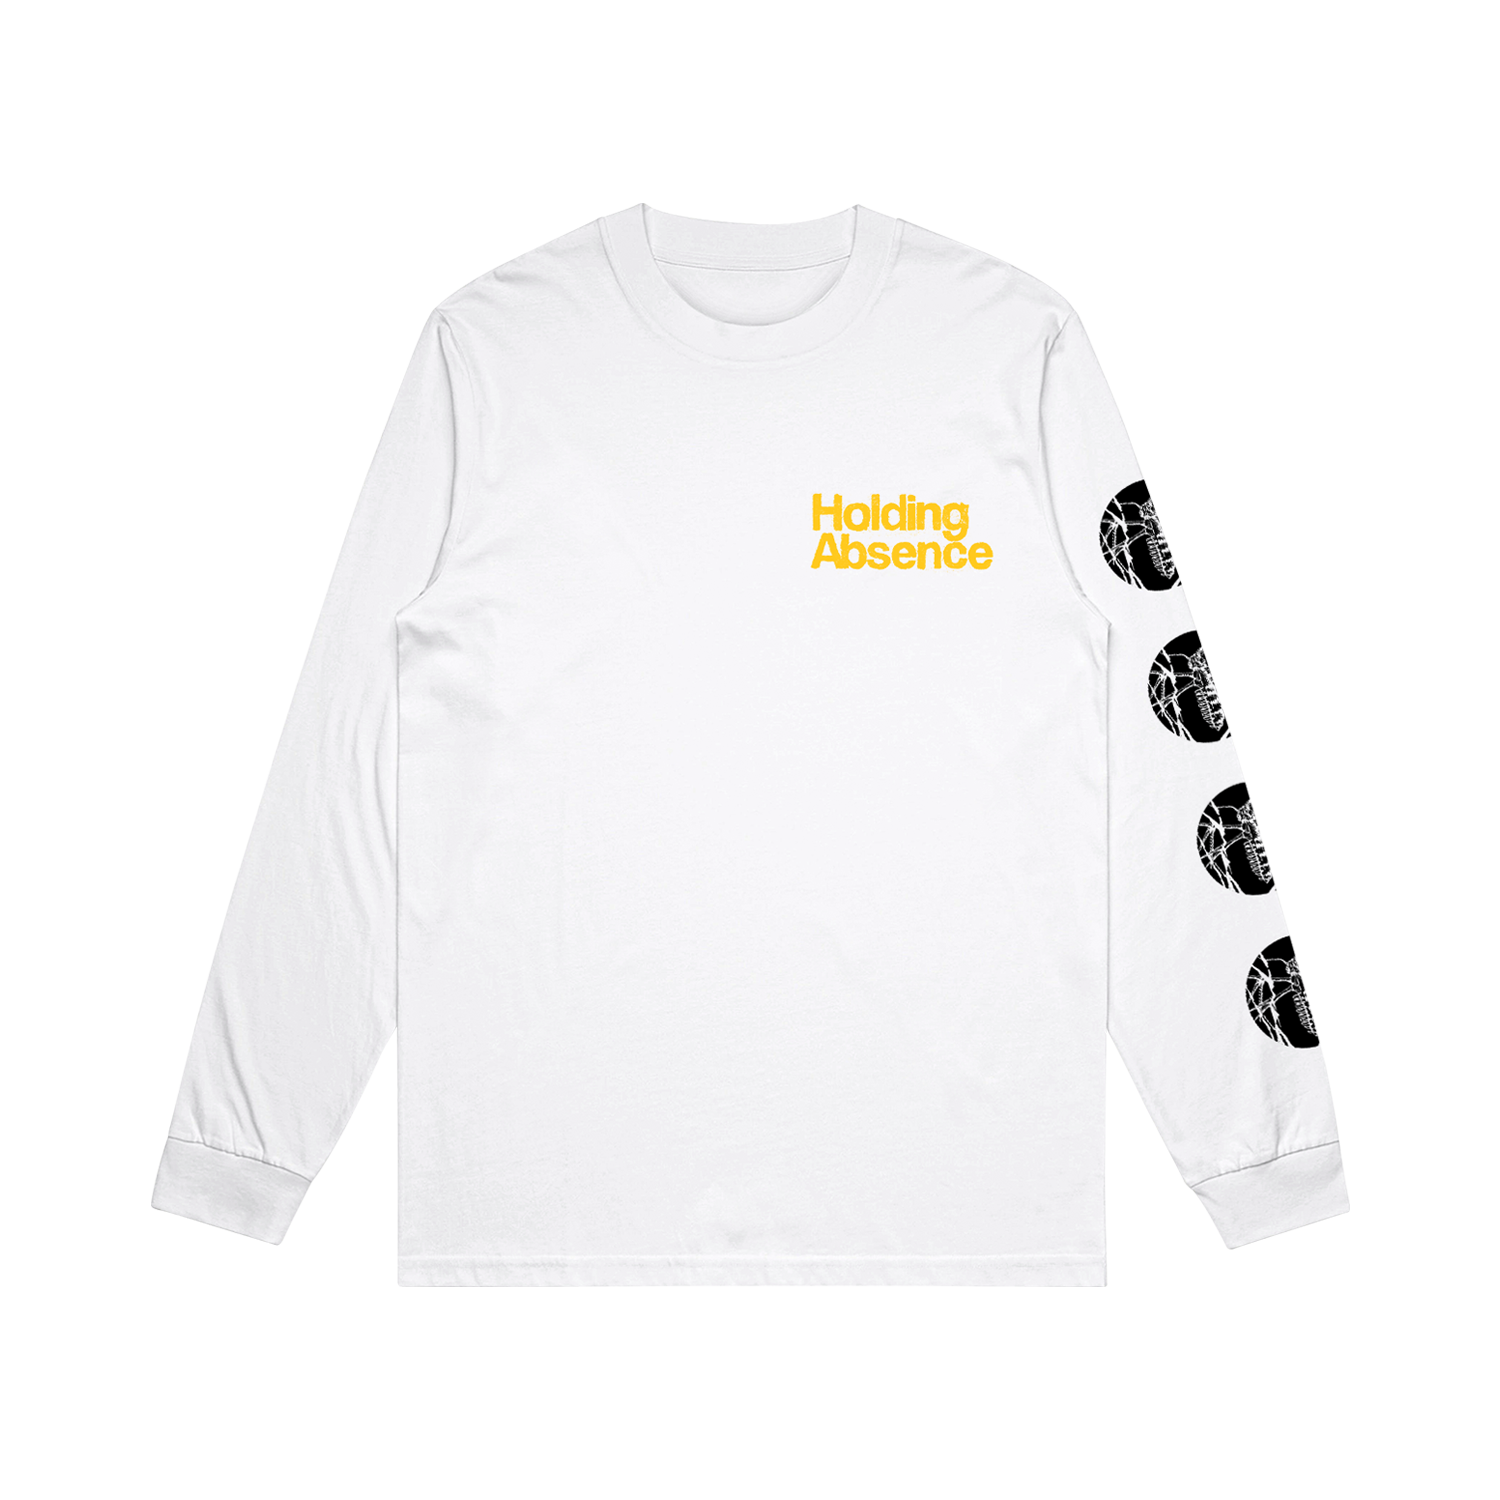 Crooked Melody Long Sleeve